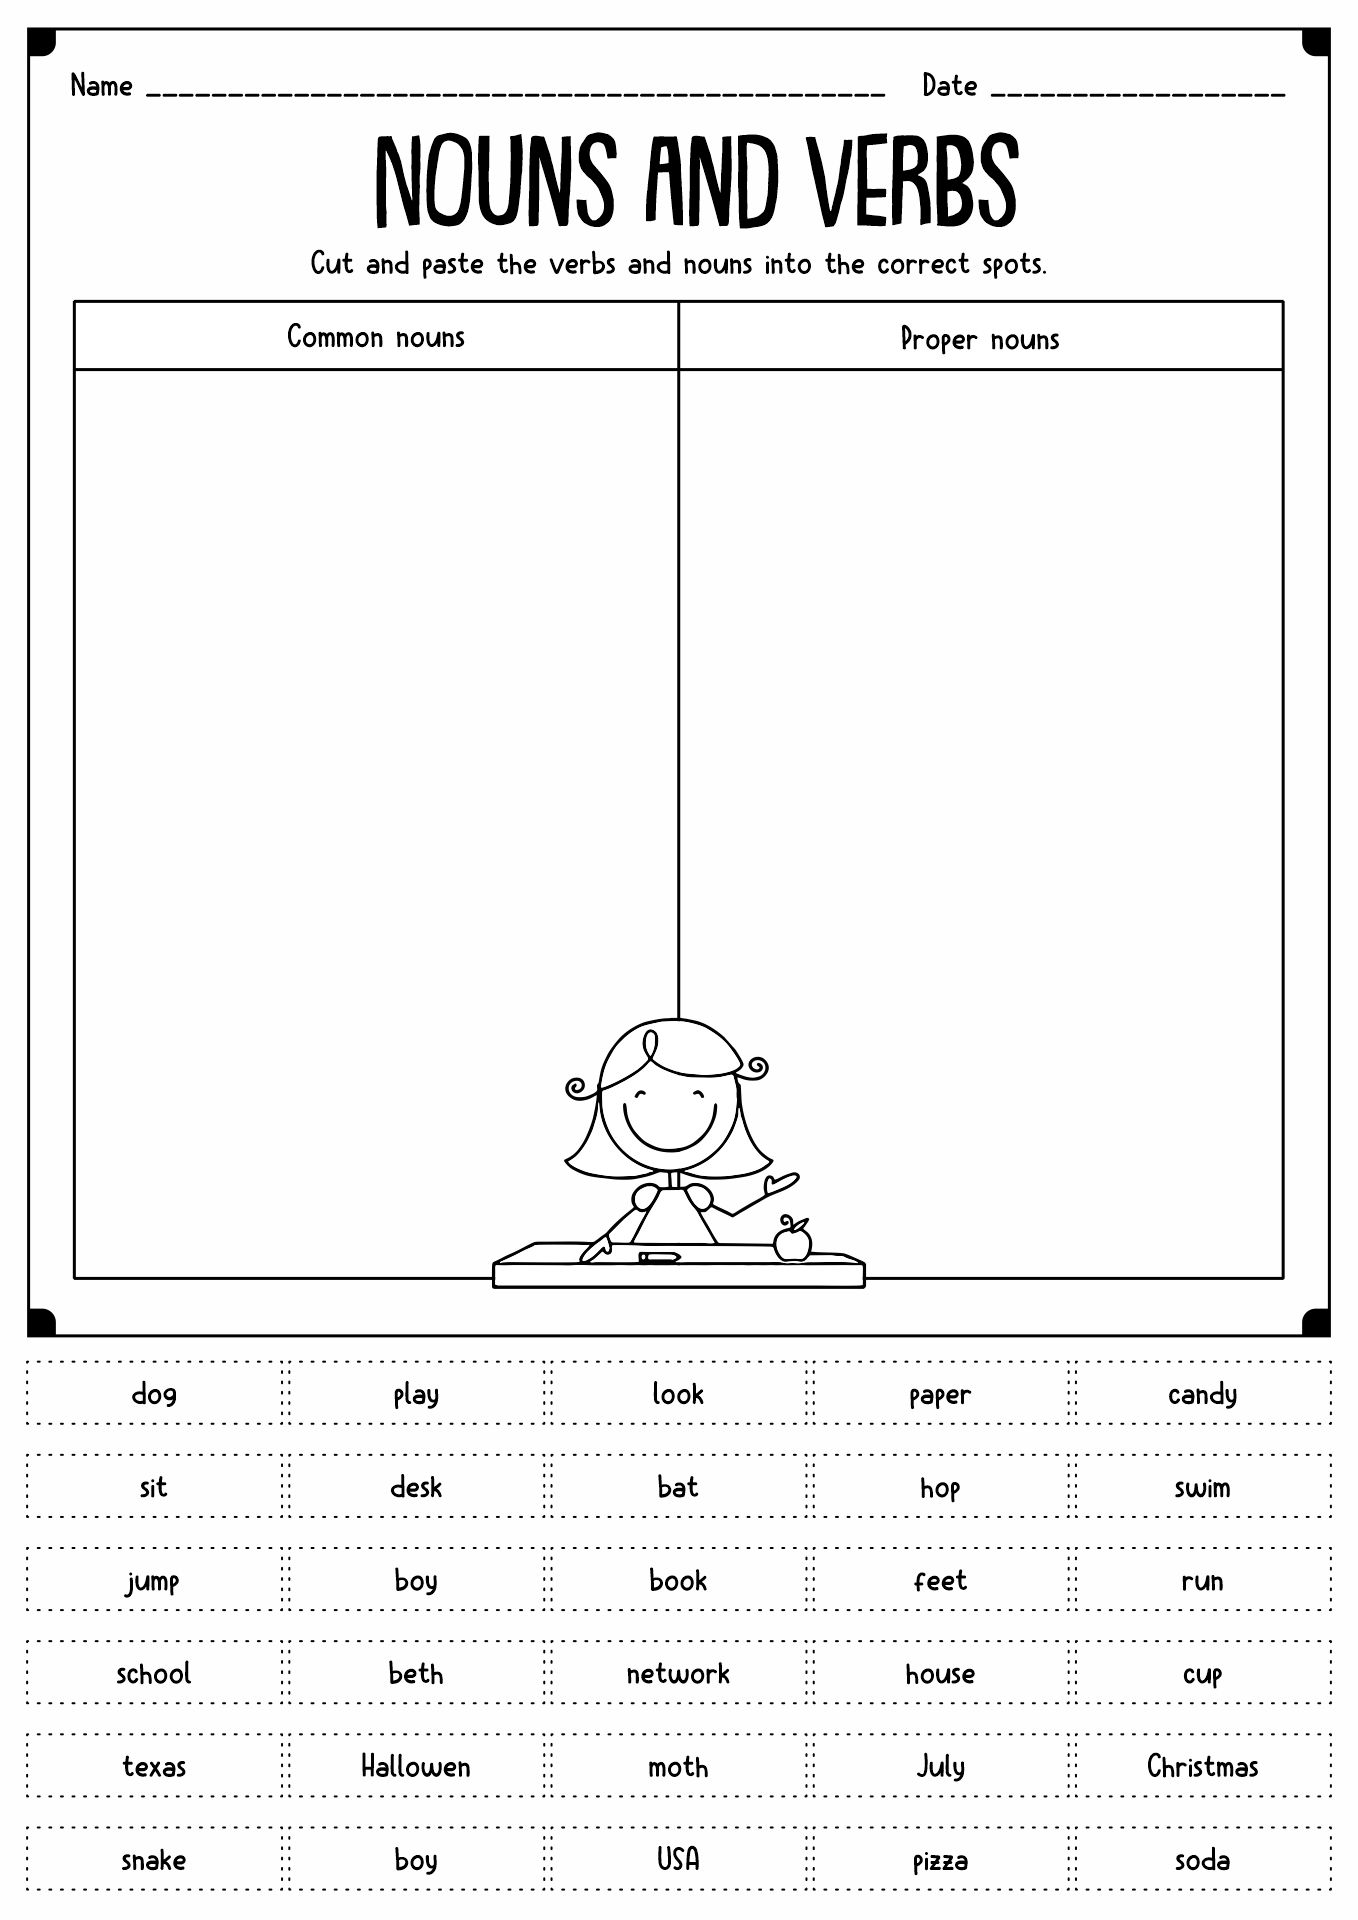 Nouns Cut and Paste Worksheets Image